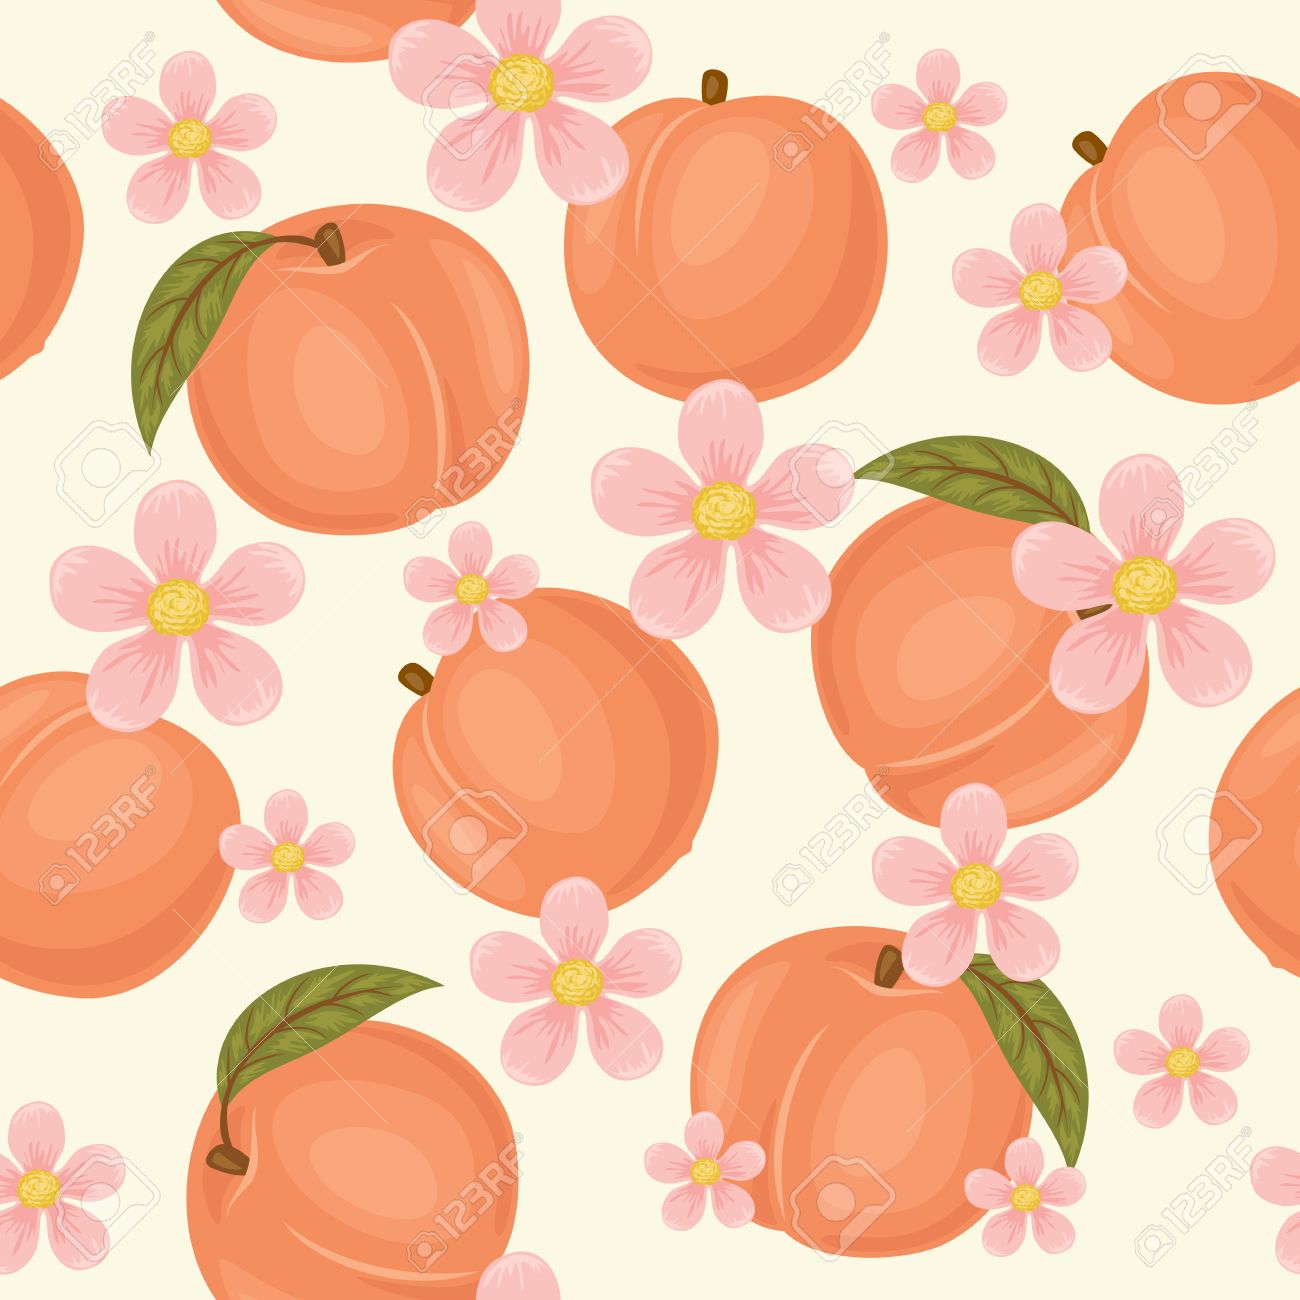 Peach Seamless Pattern Wallpaper Peaches With Green Leaves